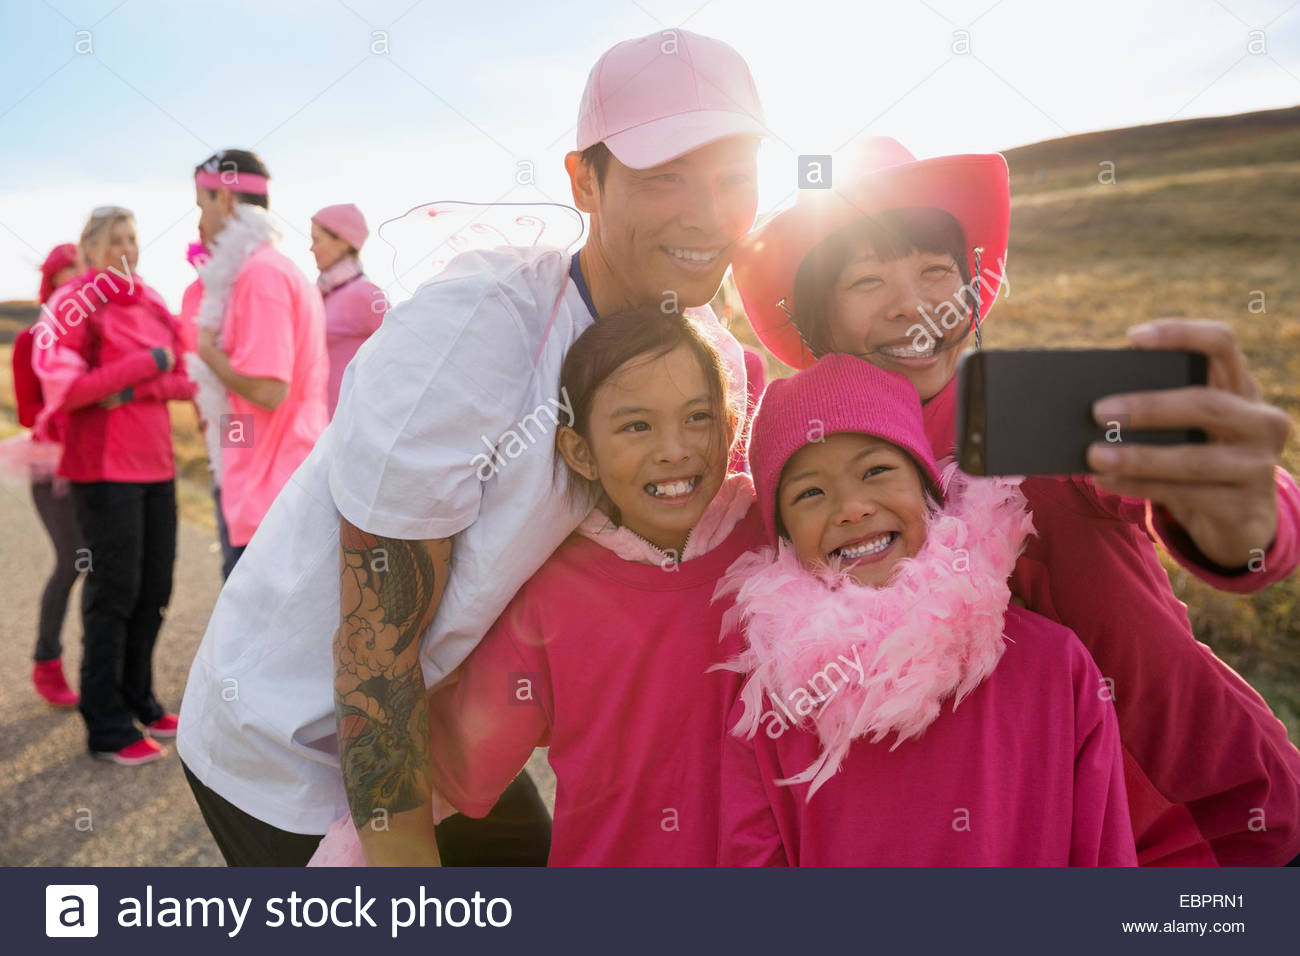 Family in pink taking selfie at charity race Stock Photo